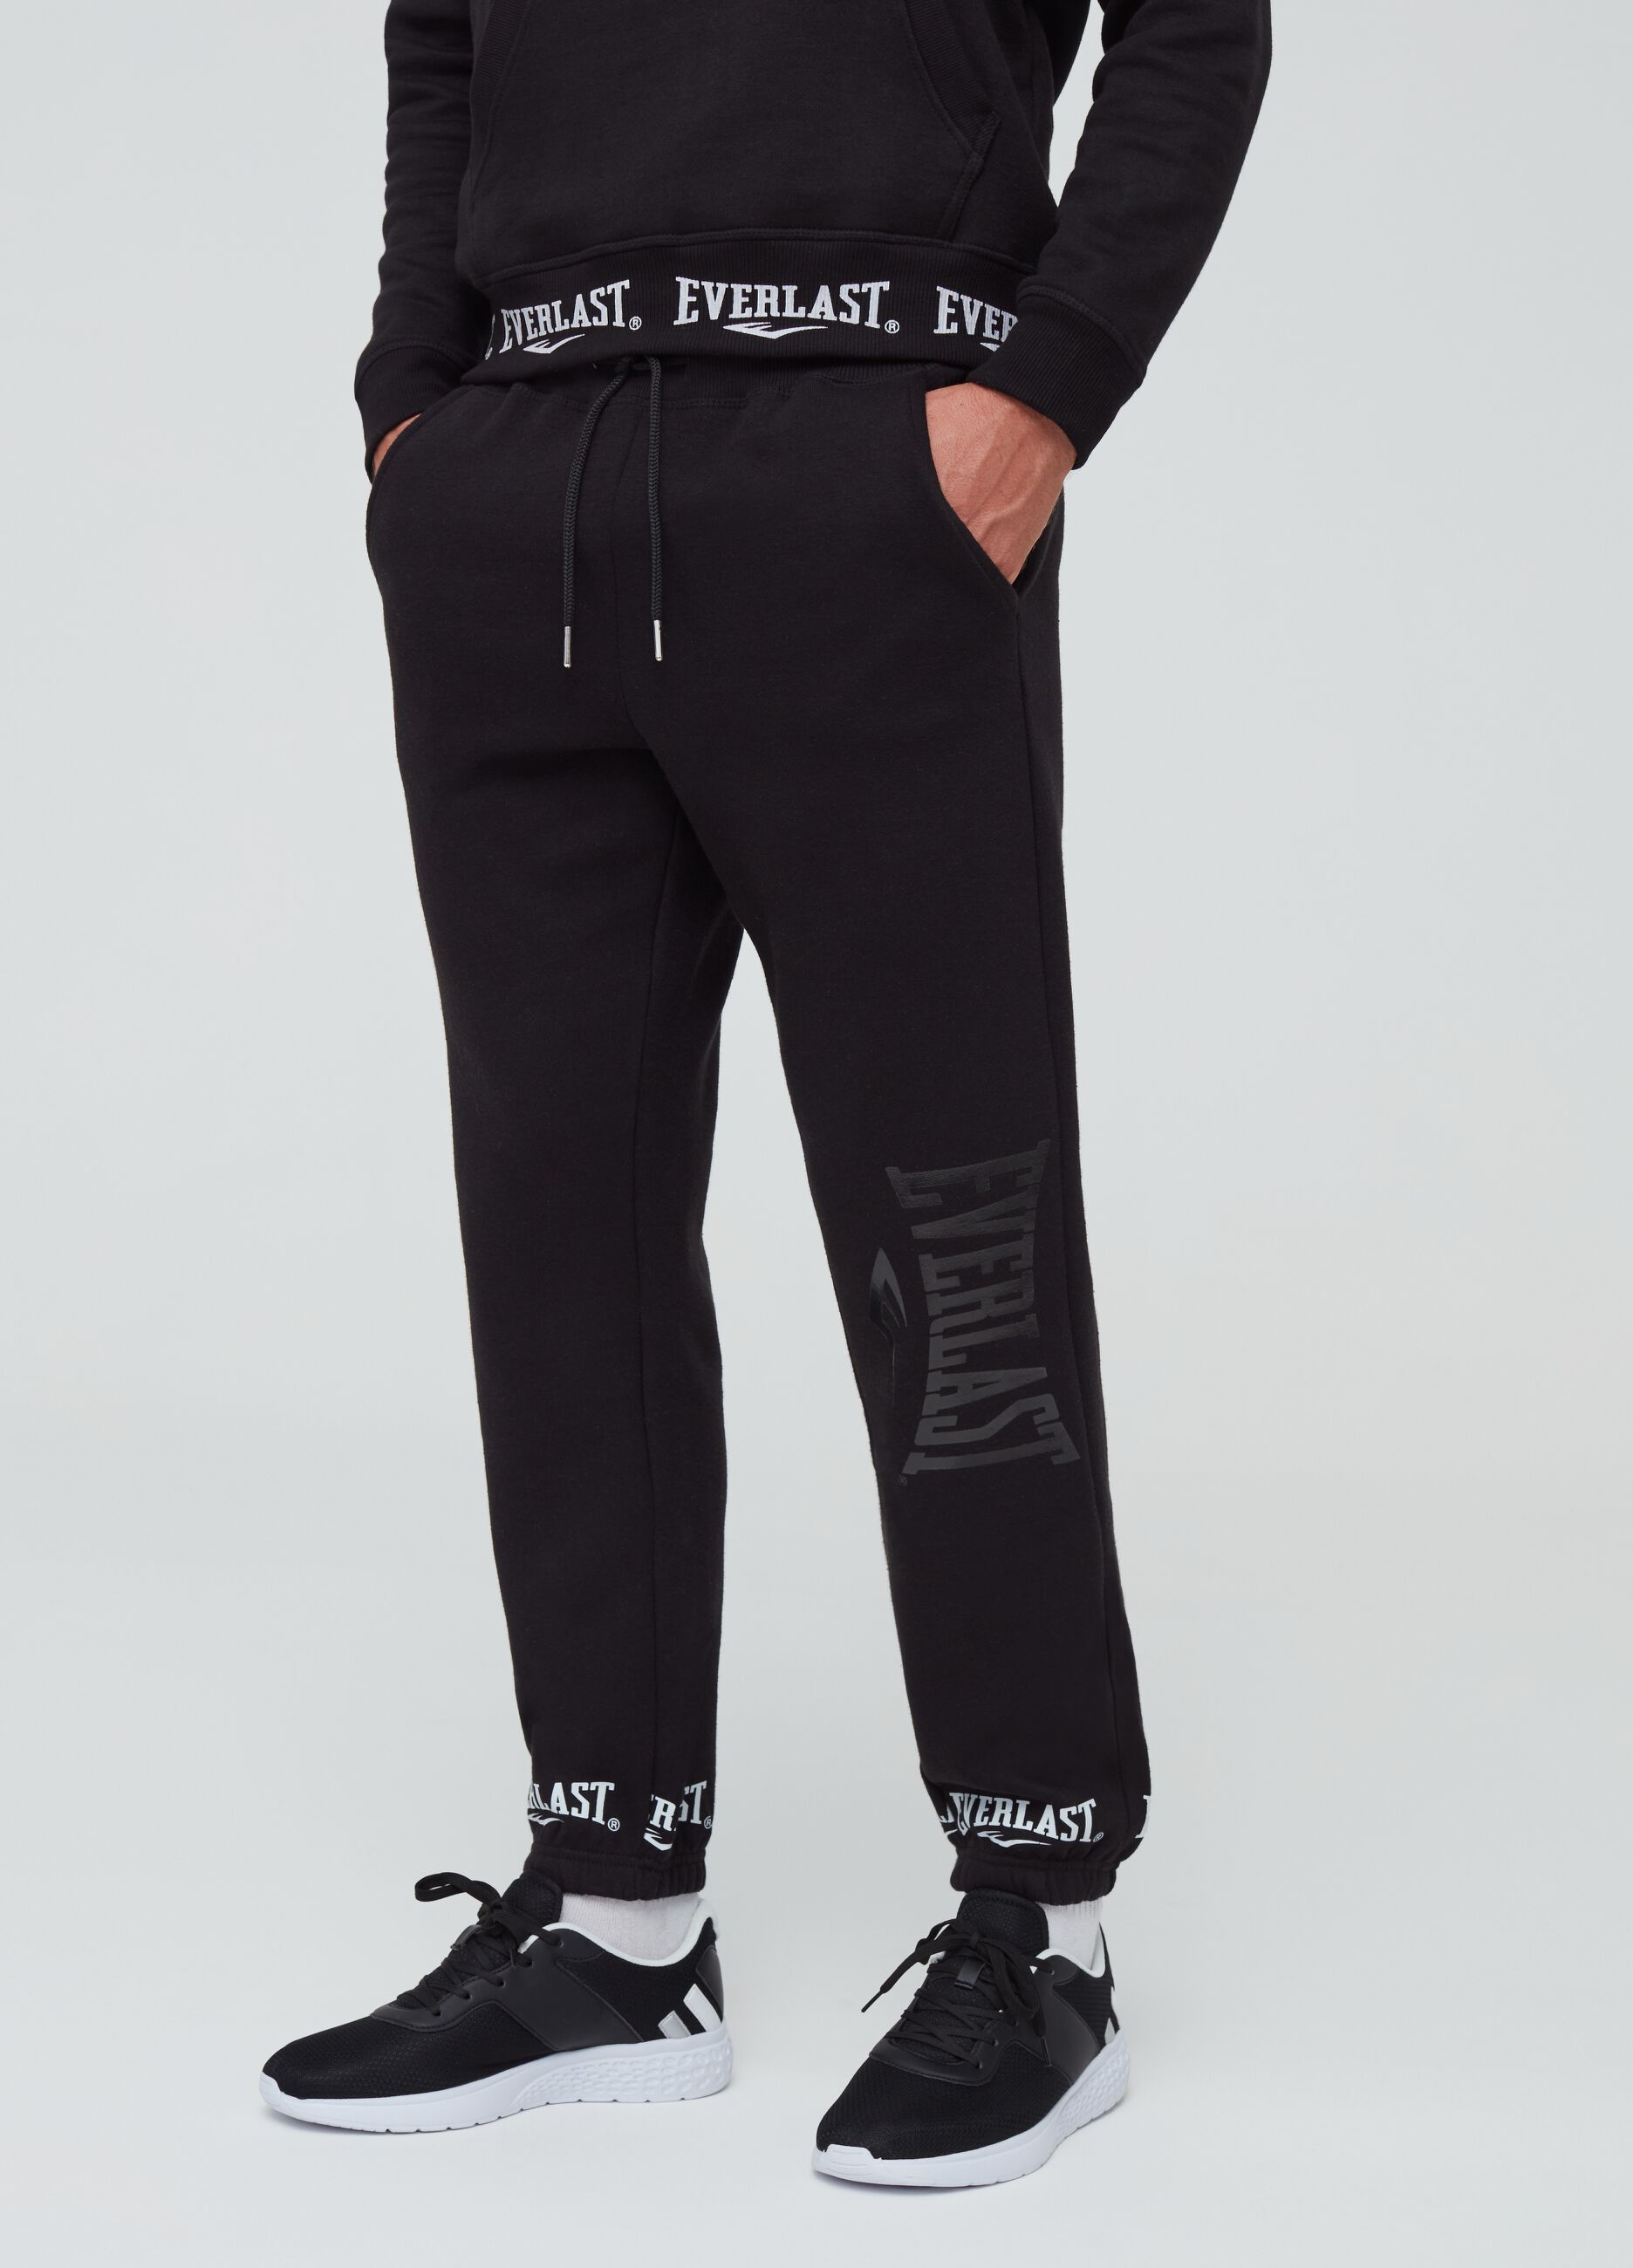 Everlast joggers with drawstring and pockets